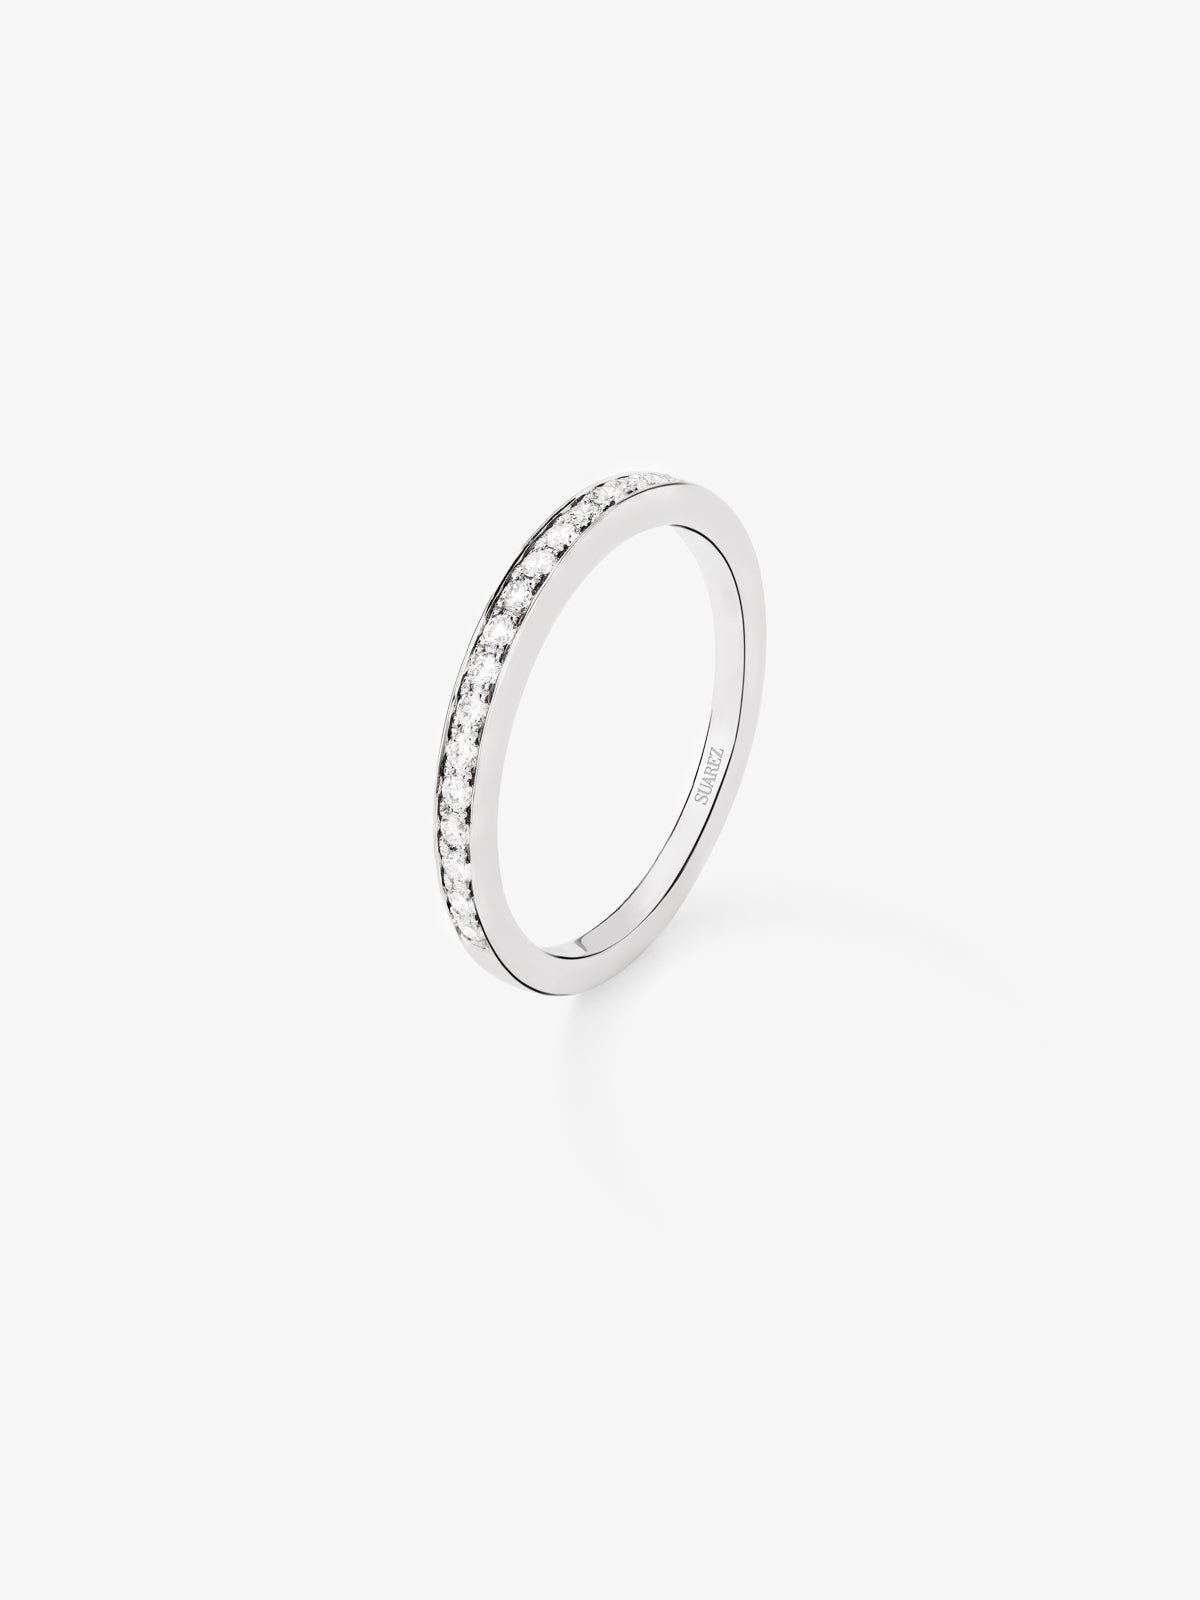 Half ring in 18K white gold with 16 brilliant-cut diamonds with a total of 0.22 cts